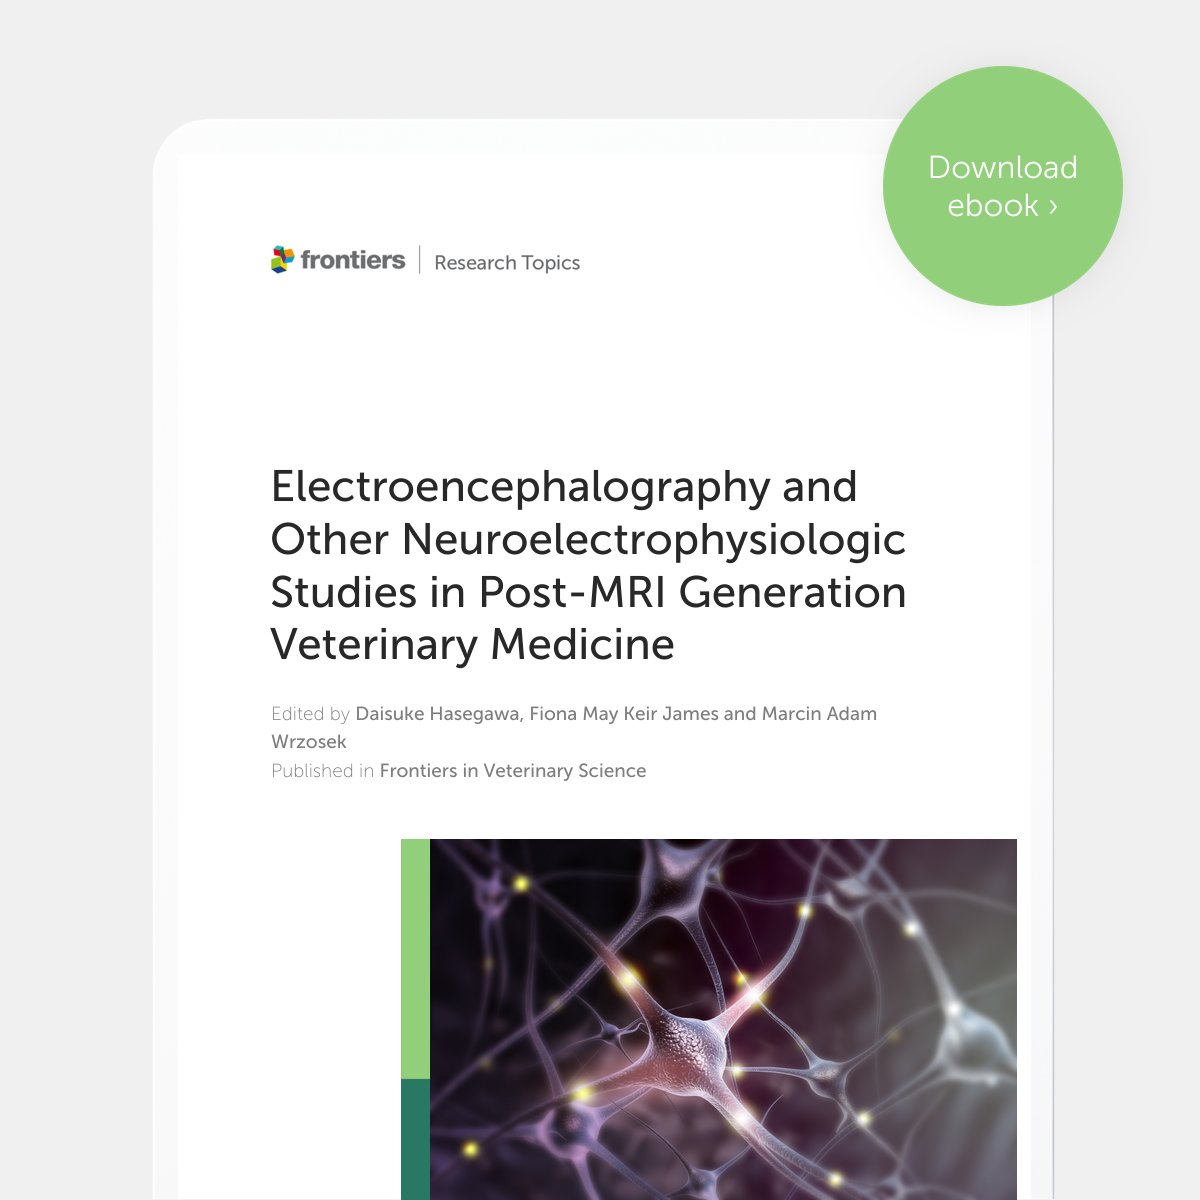 A new eBook exploring electroencephalography and other neuroelectrophysiologic studies in post-MRI generation veterinary medicine is available now. Download the eBook ➡️ fro.ntiers.in/29118